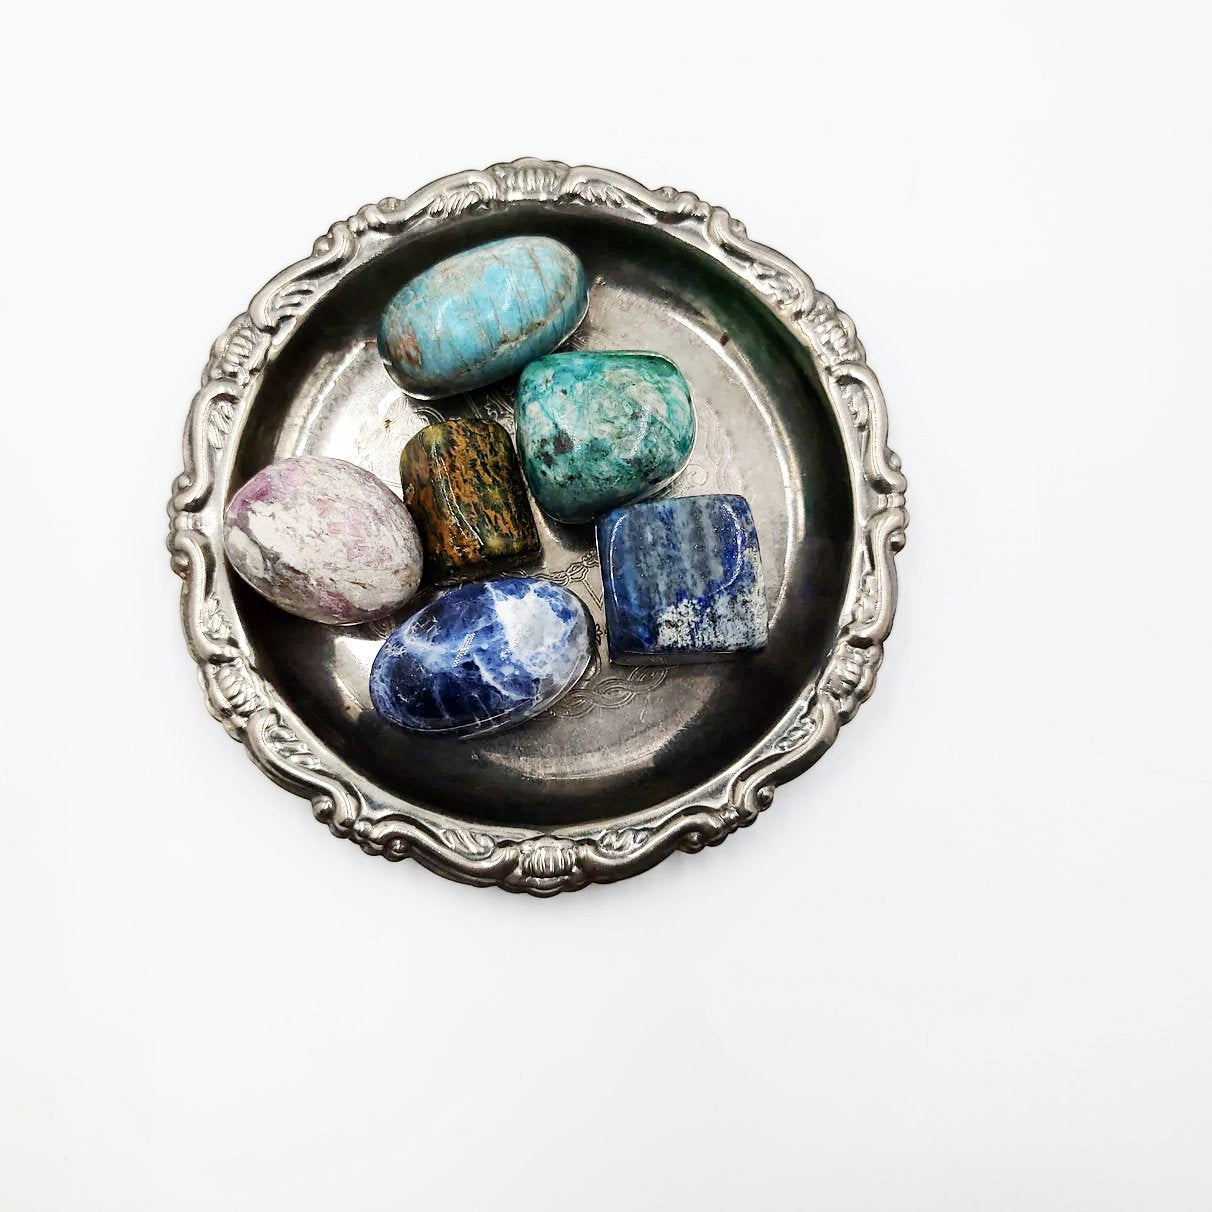 Water - Element Stone Set - Elevated Metaphysical